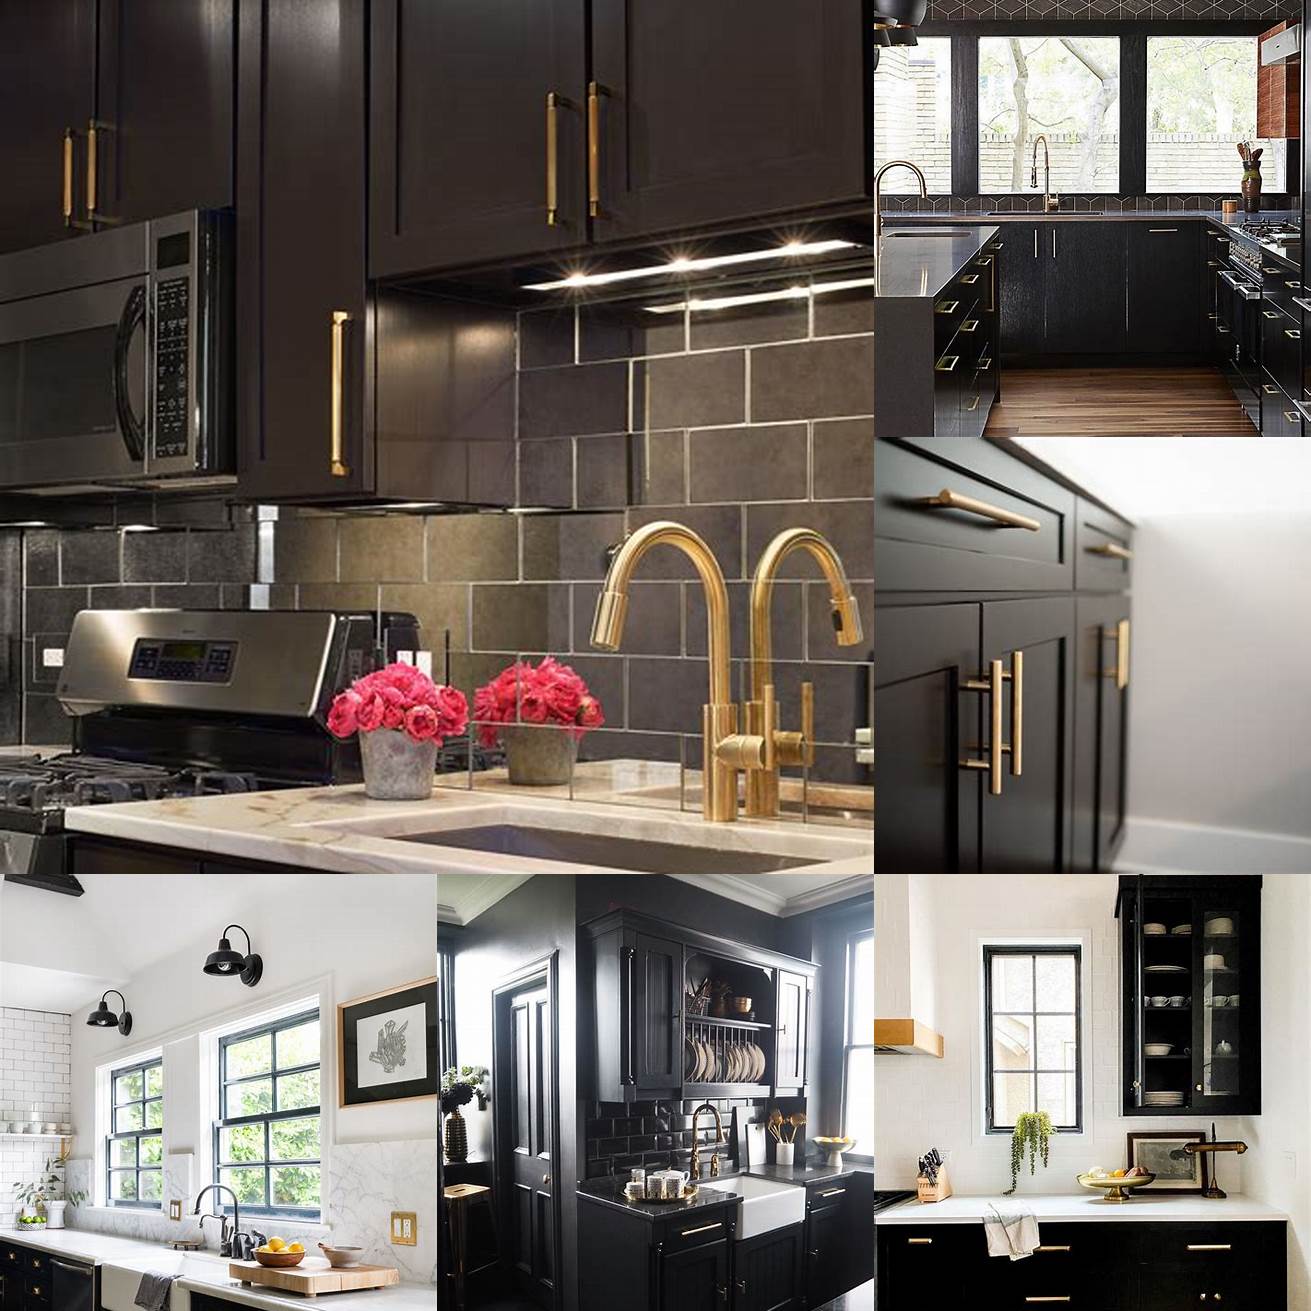 Dark cabinets with gold hardware